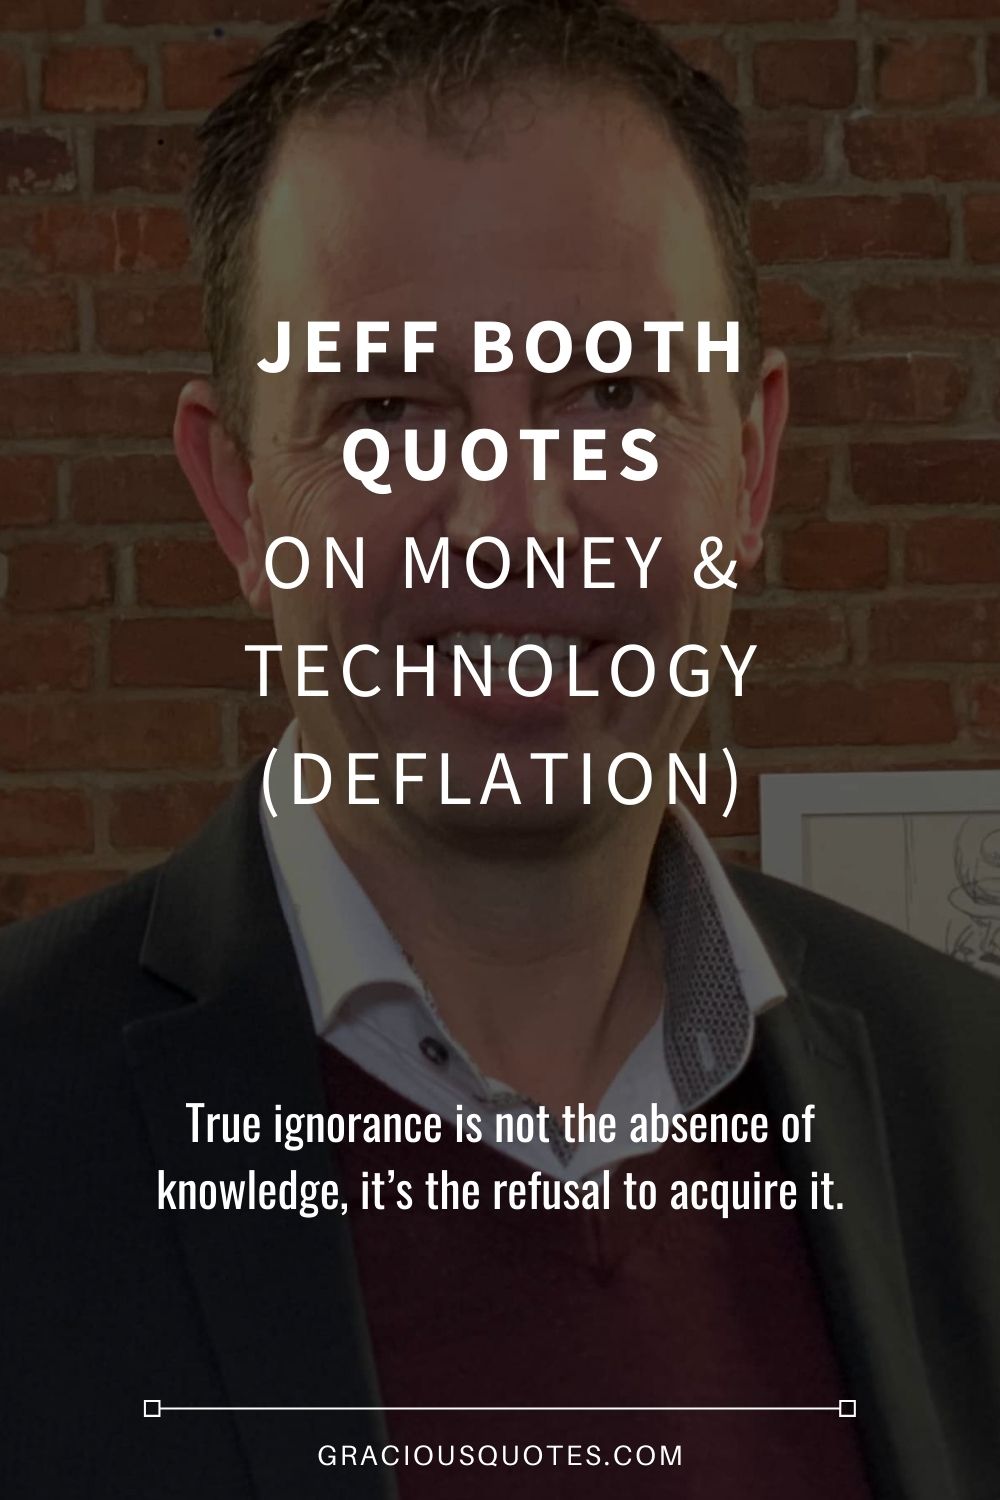 Jeff Booth Quotes on Money & Technology (DEFLATION) - Gracious Quotes